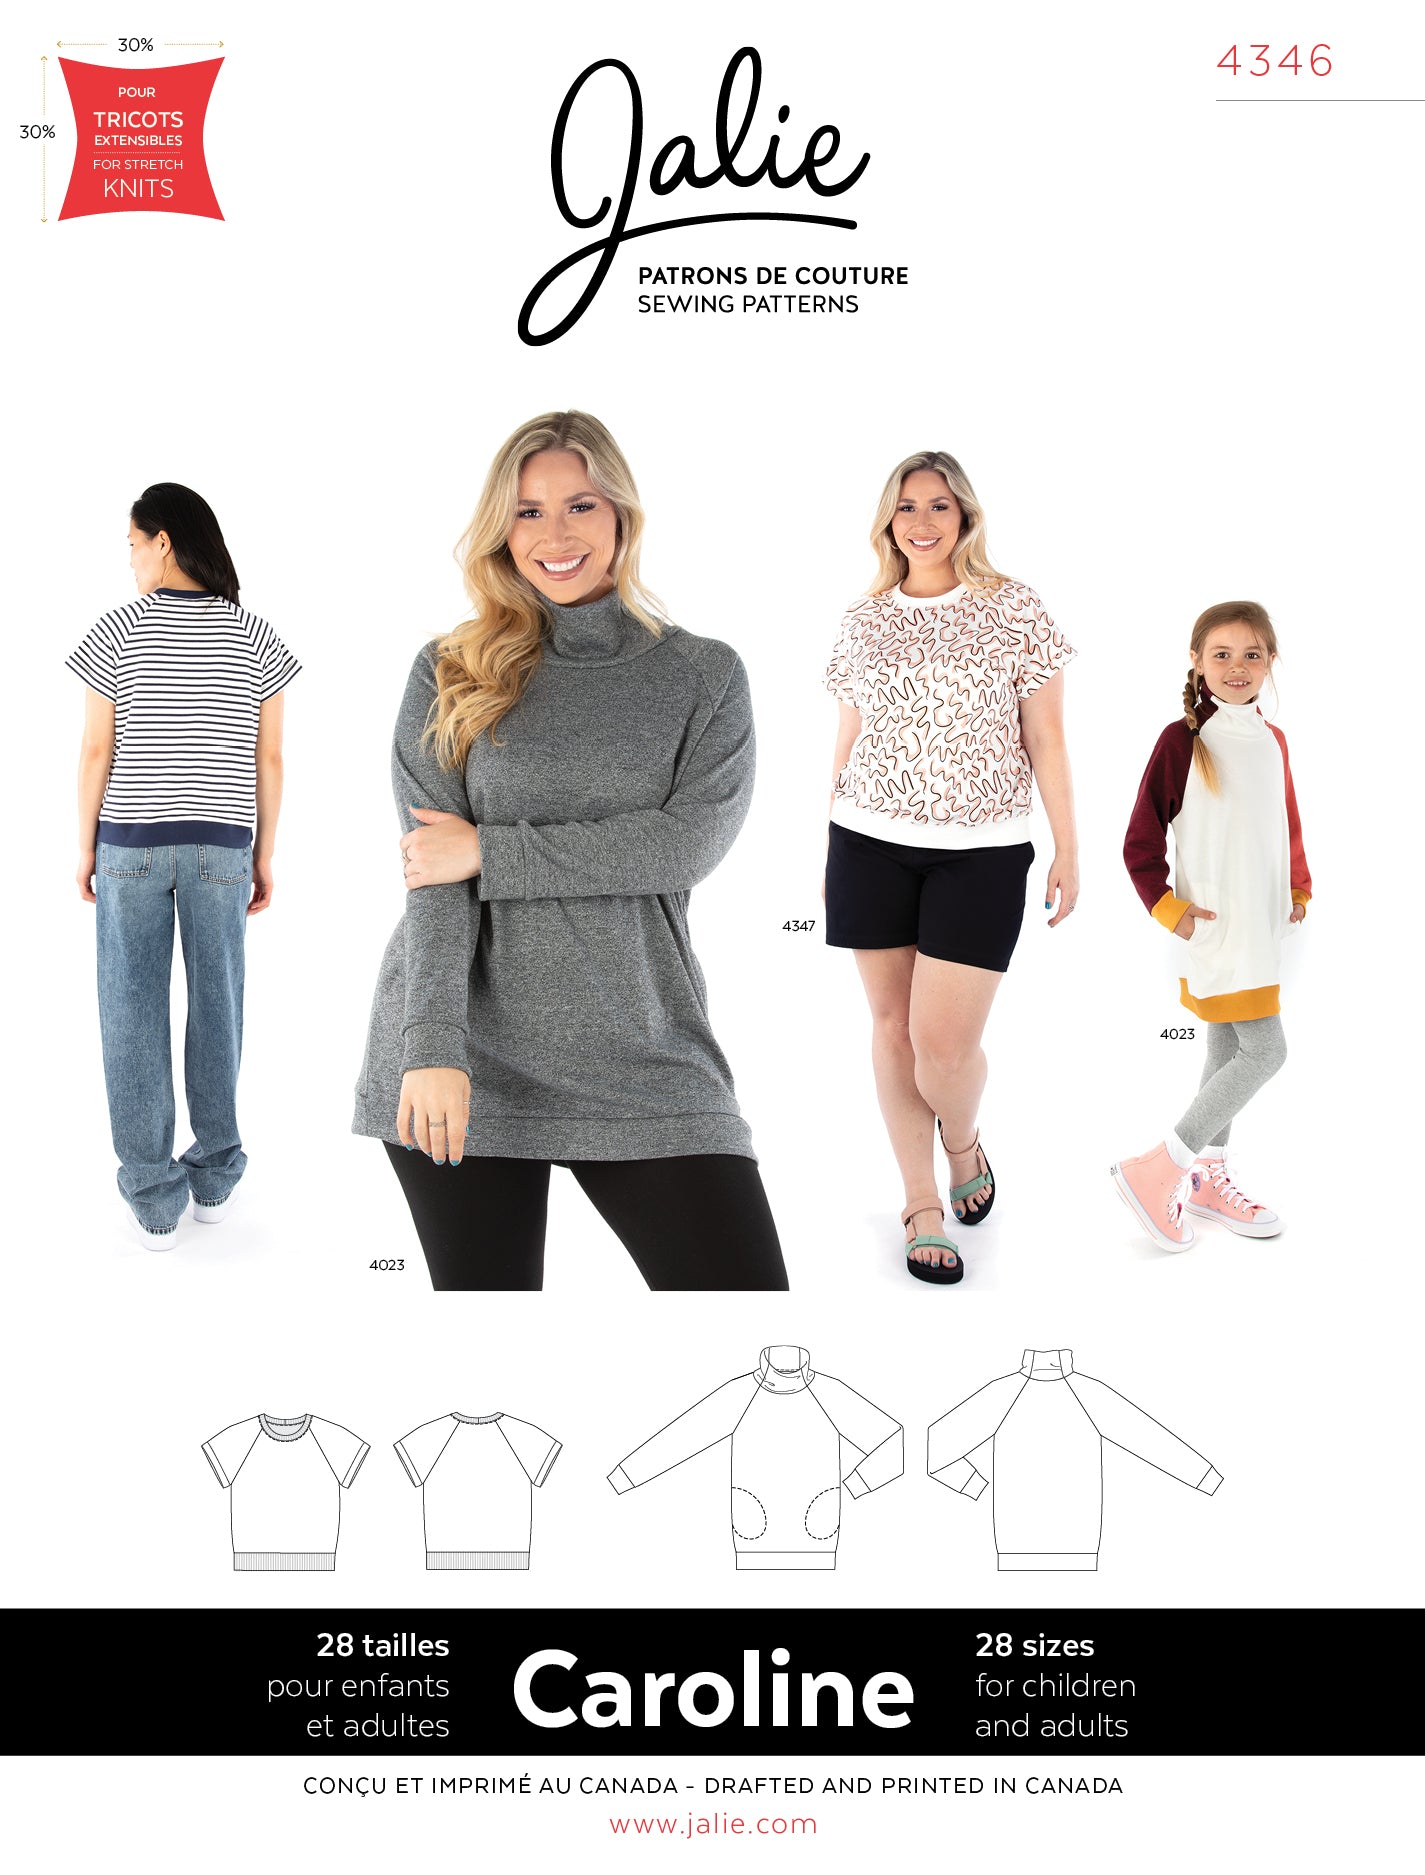 T-shirt and tunic with raglan sleeves - CAROLINE - 4346 | Paper pattern - Jalie 